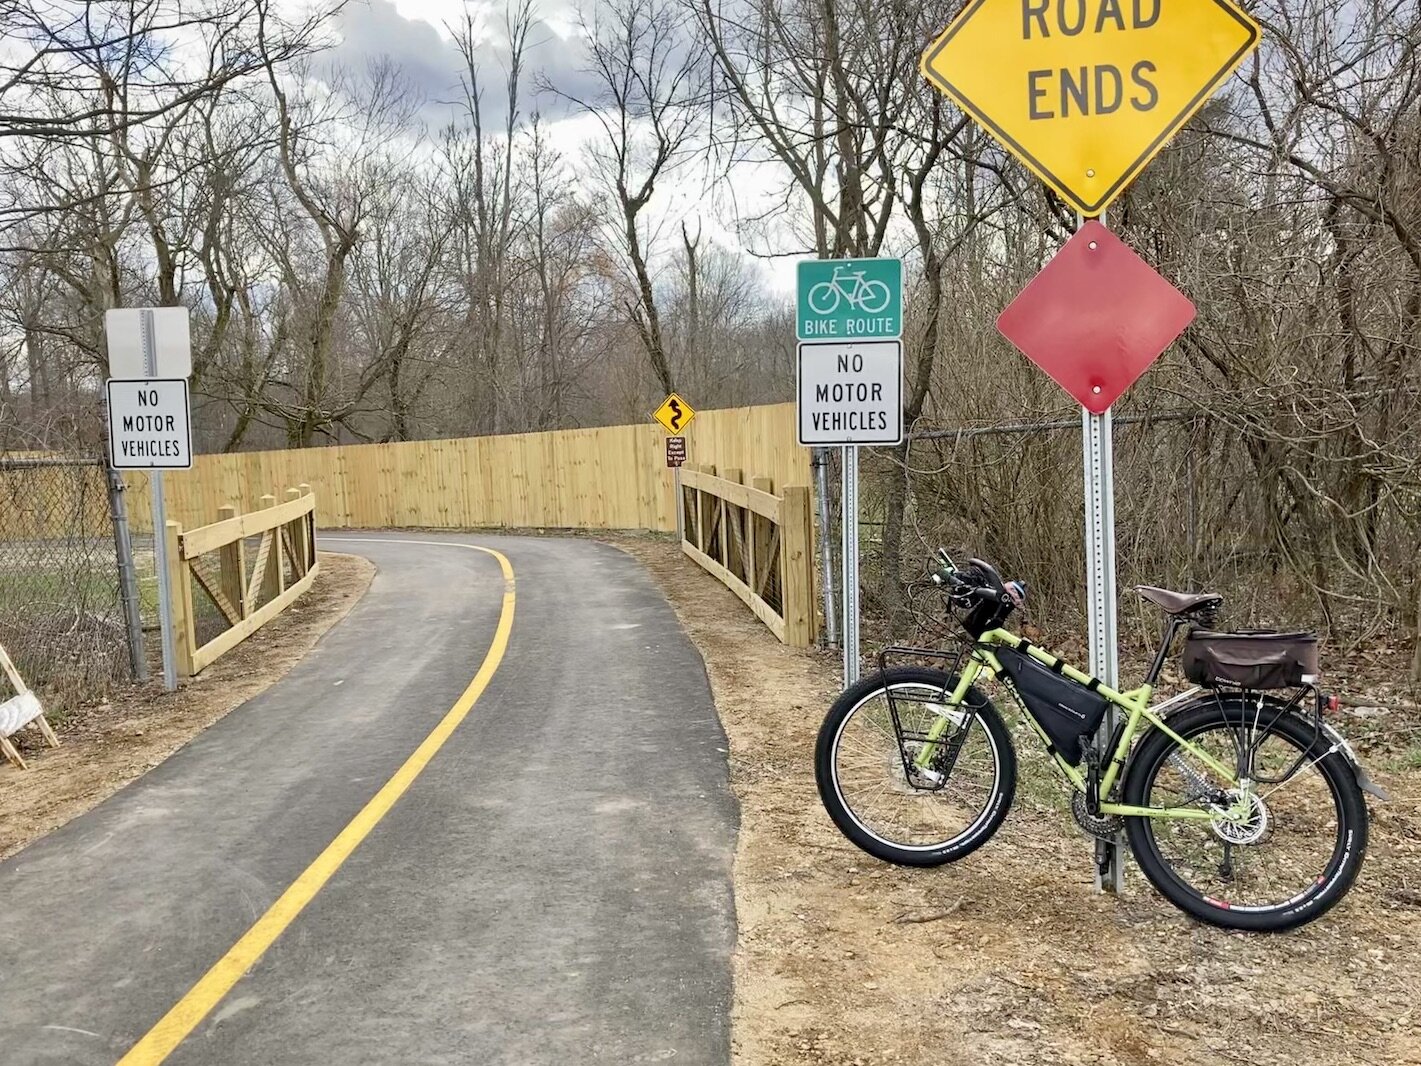 Transportation plans take bikes into account, too. Early spring 2021, Mark Wedel’s bike at the newly-completed section of the KRVT going through Galesburg.